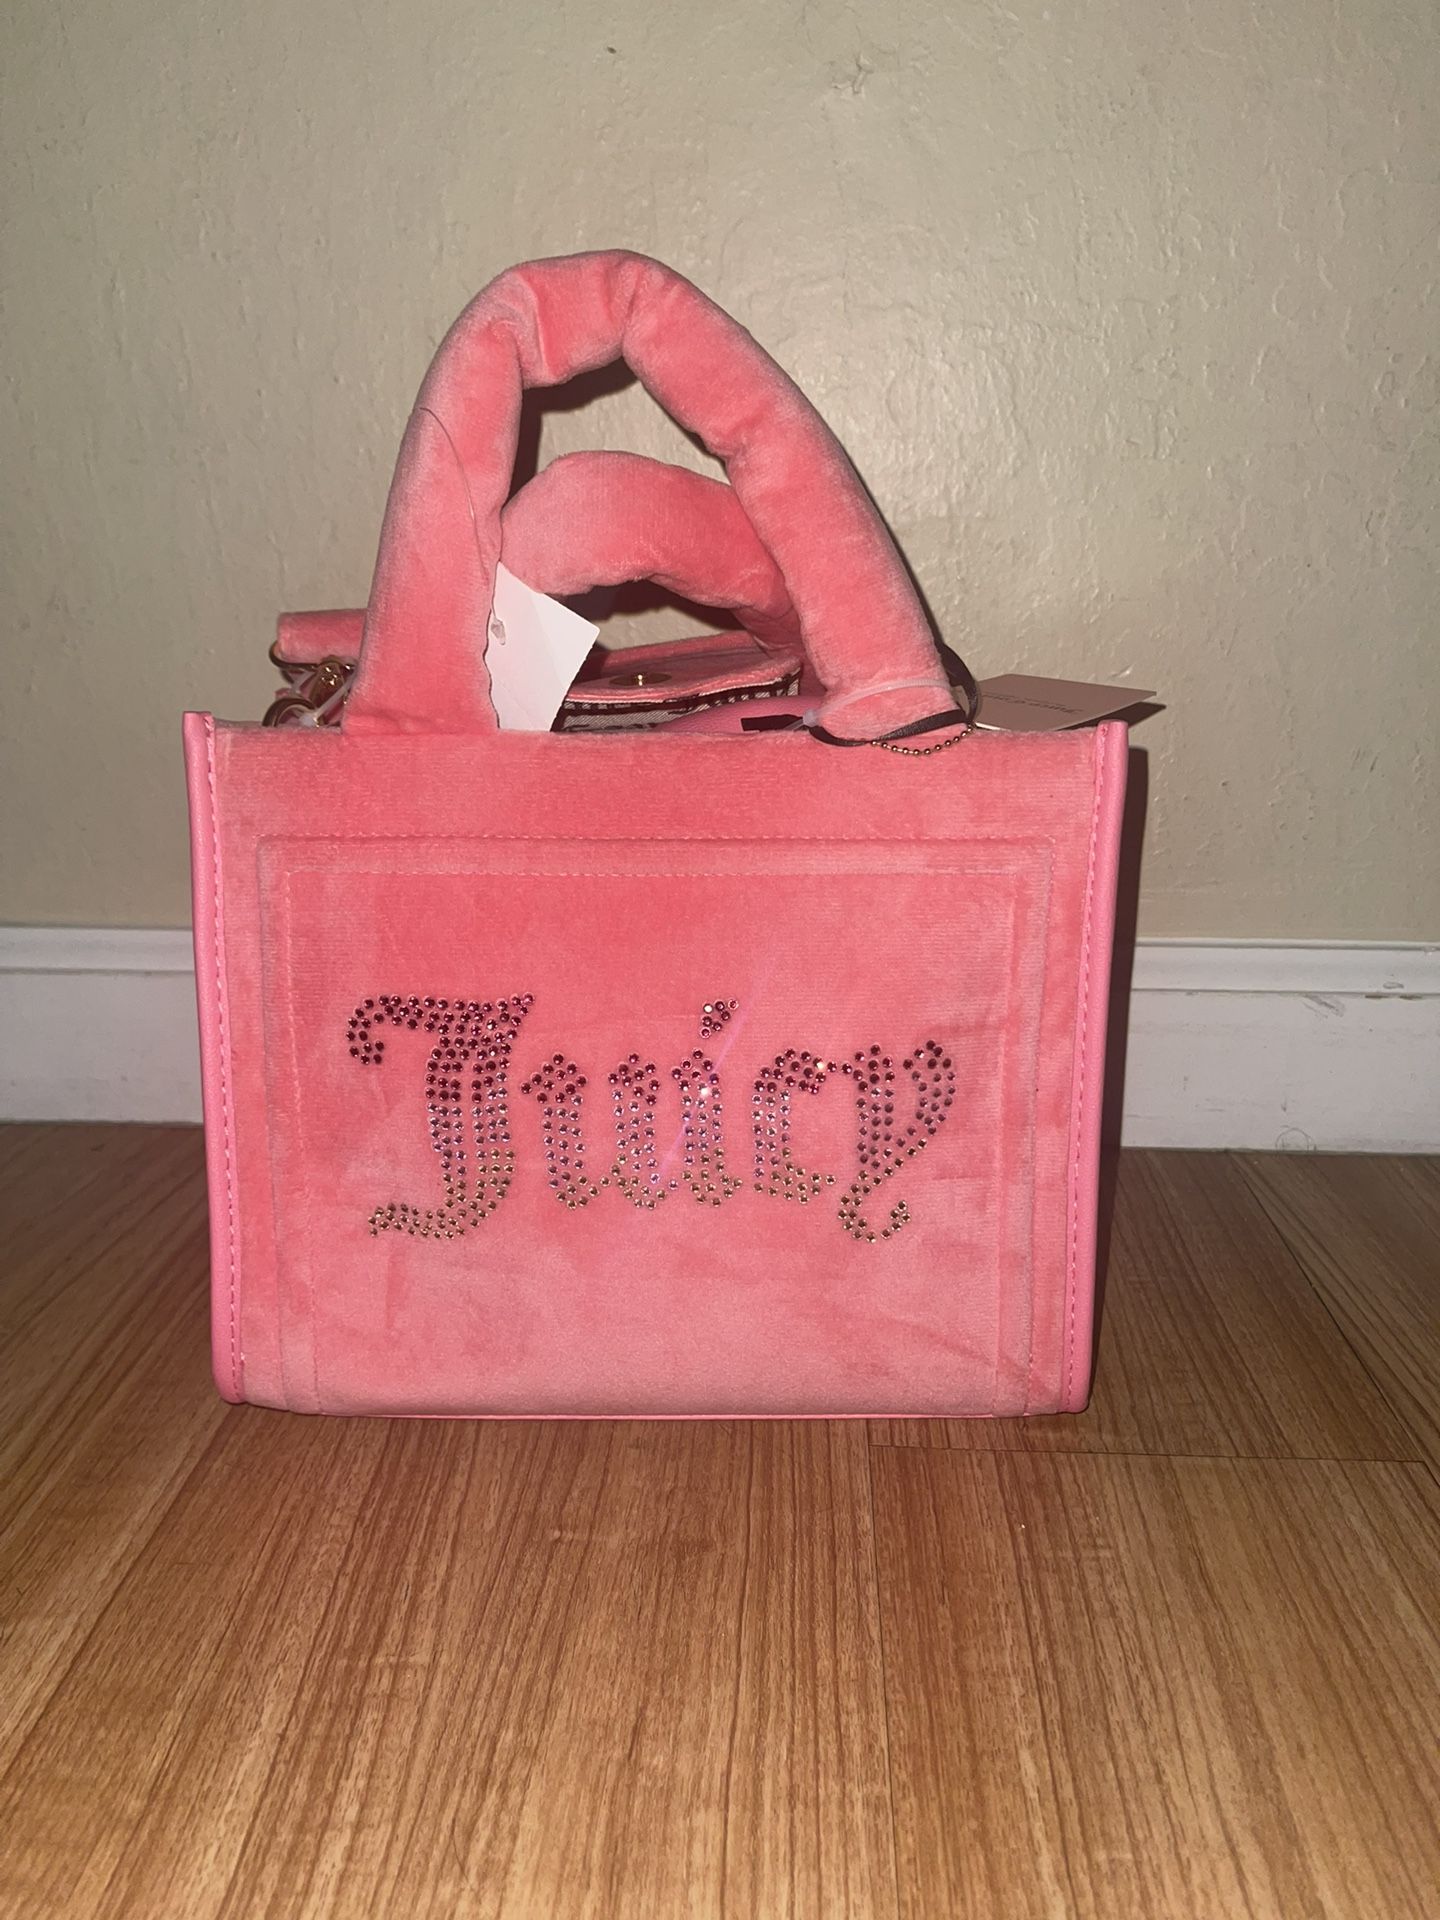 Juicy Couture Tote